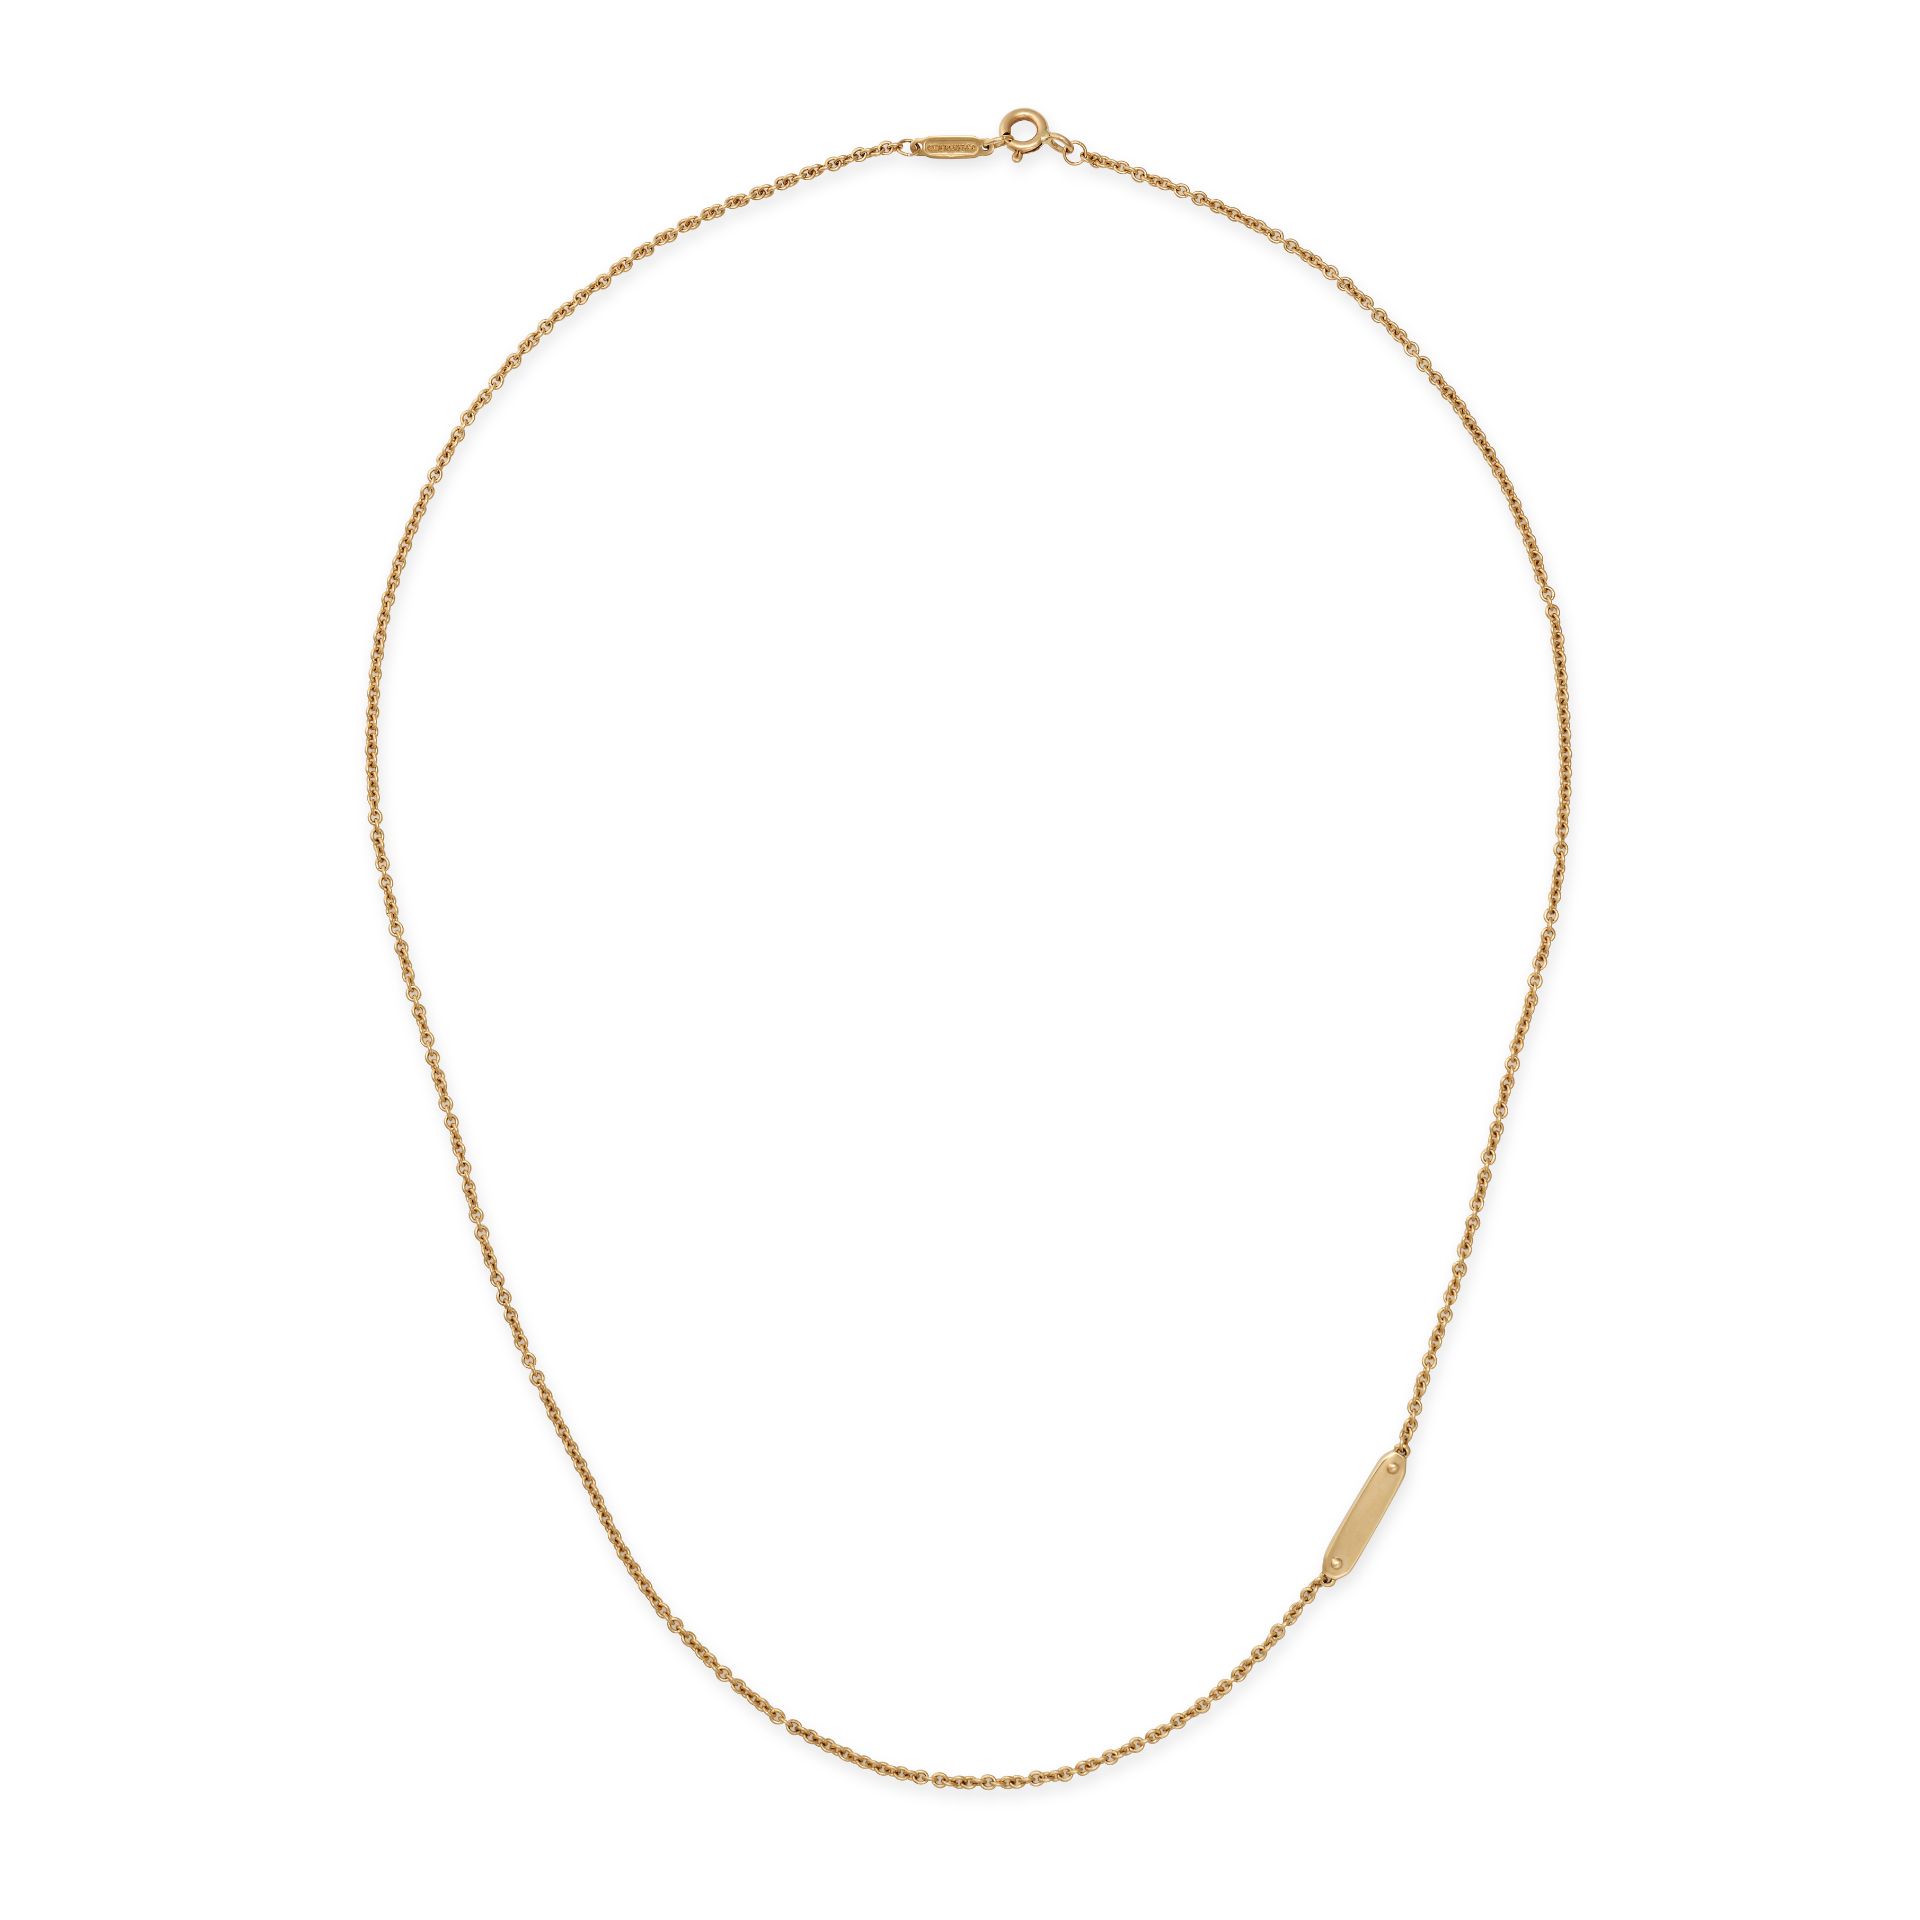 TIFFANY & CO., A CHAIN NECKLACE in 18ct yellow gold, the chain accented by a gold bar, signed Tif...